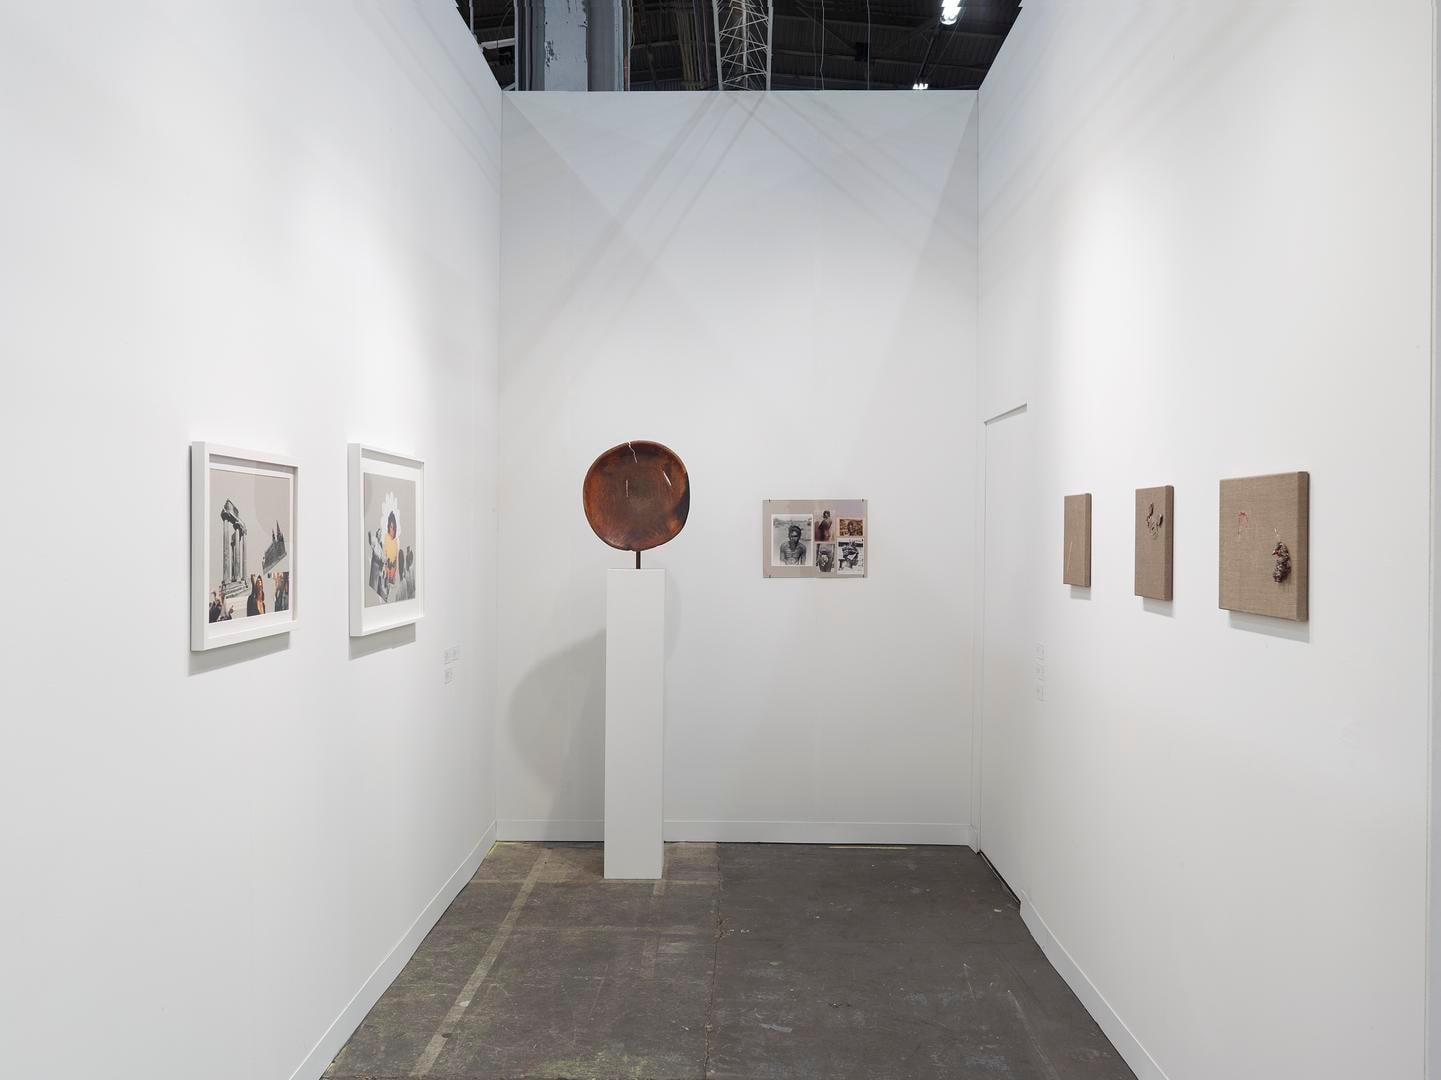  Installation view, Booth 1000, The Armory Show 2015